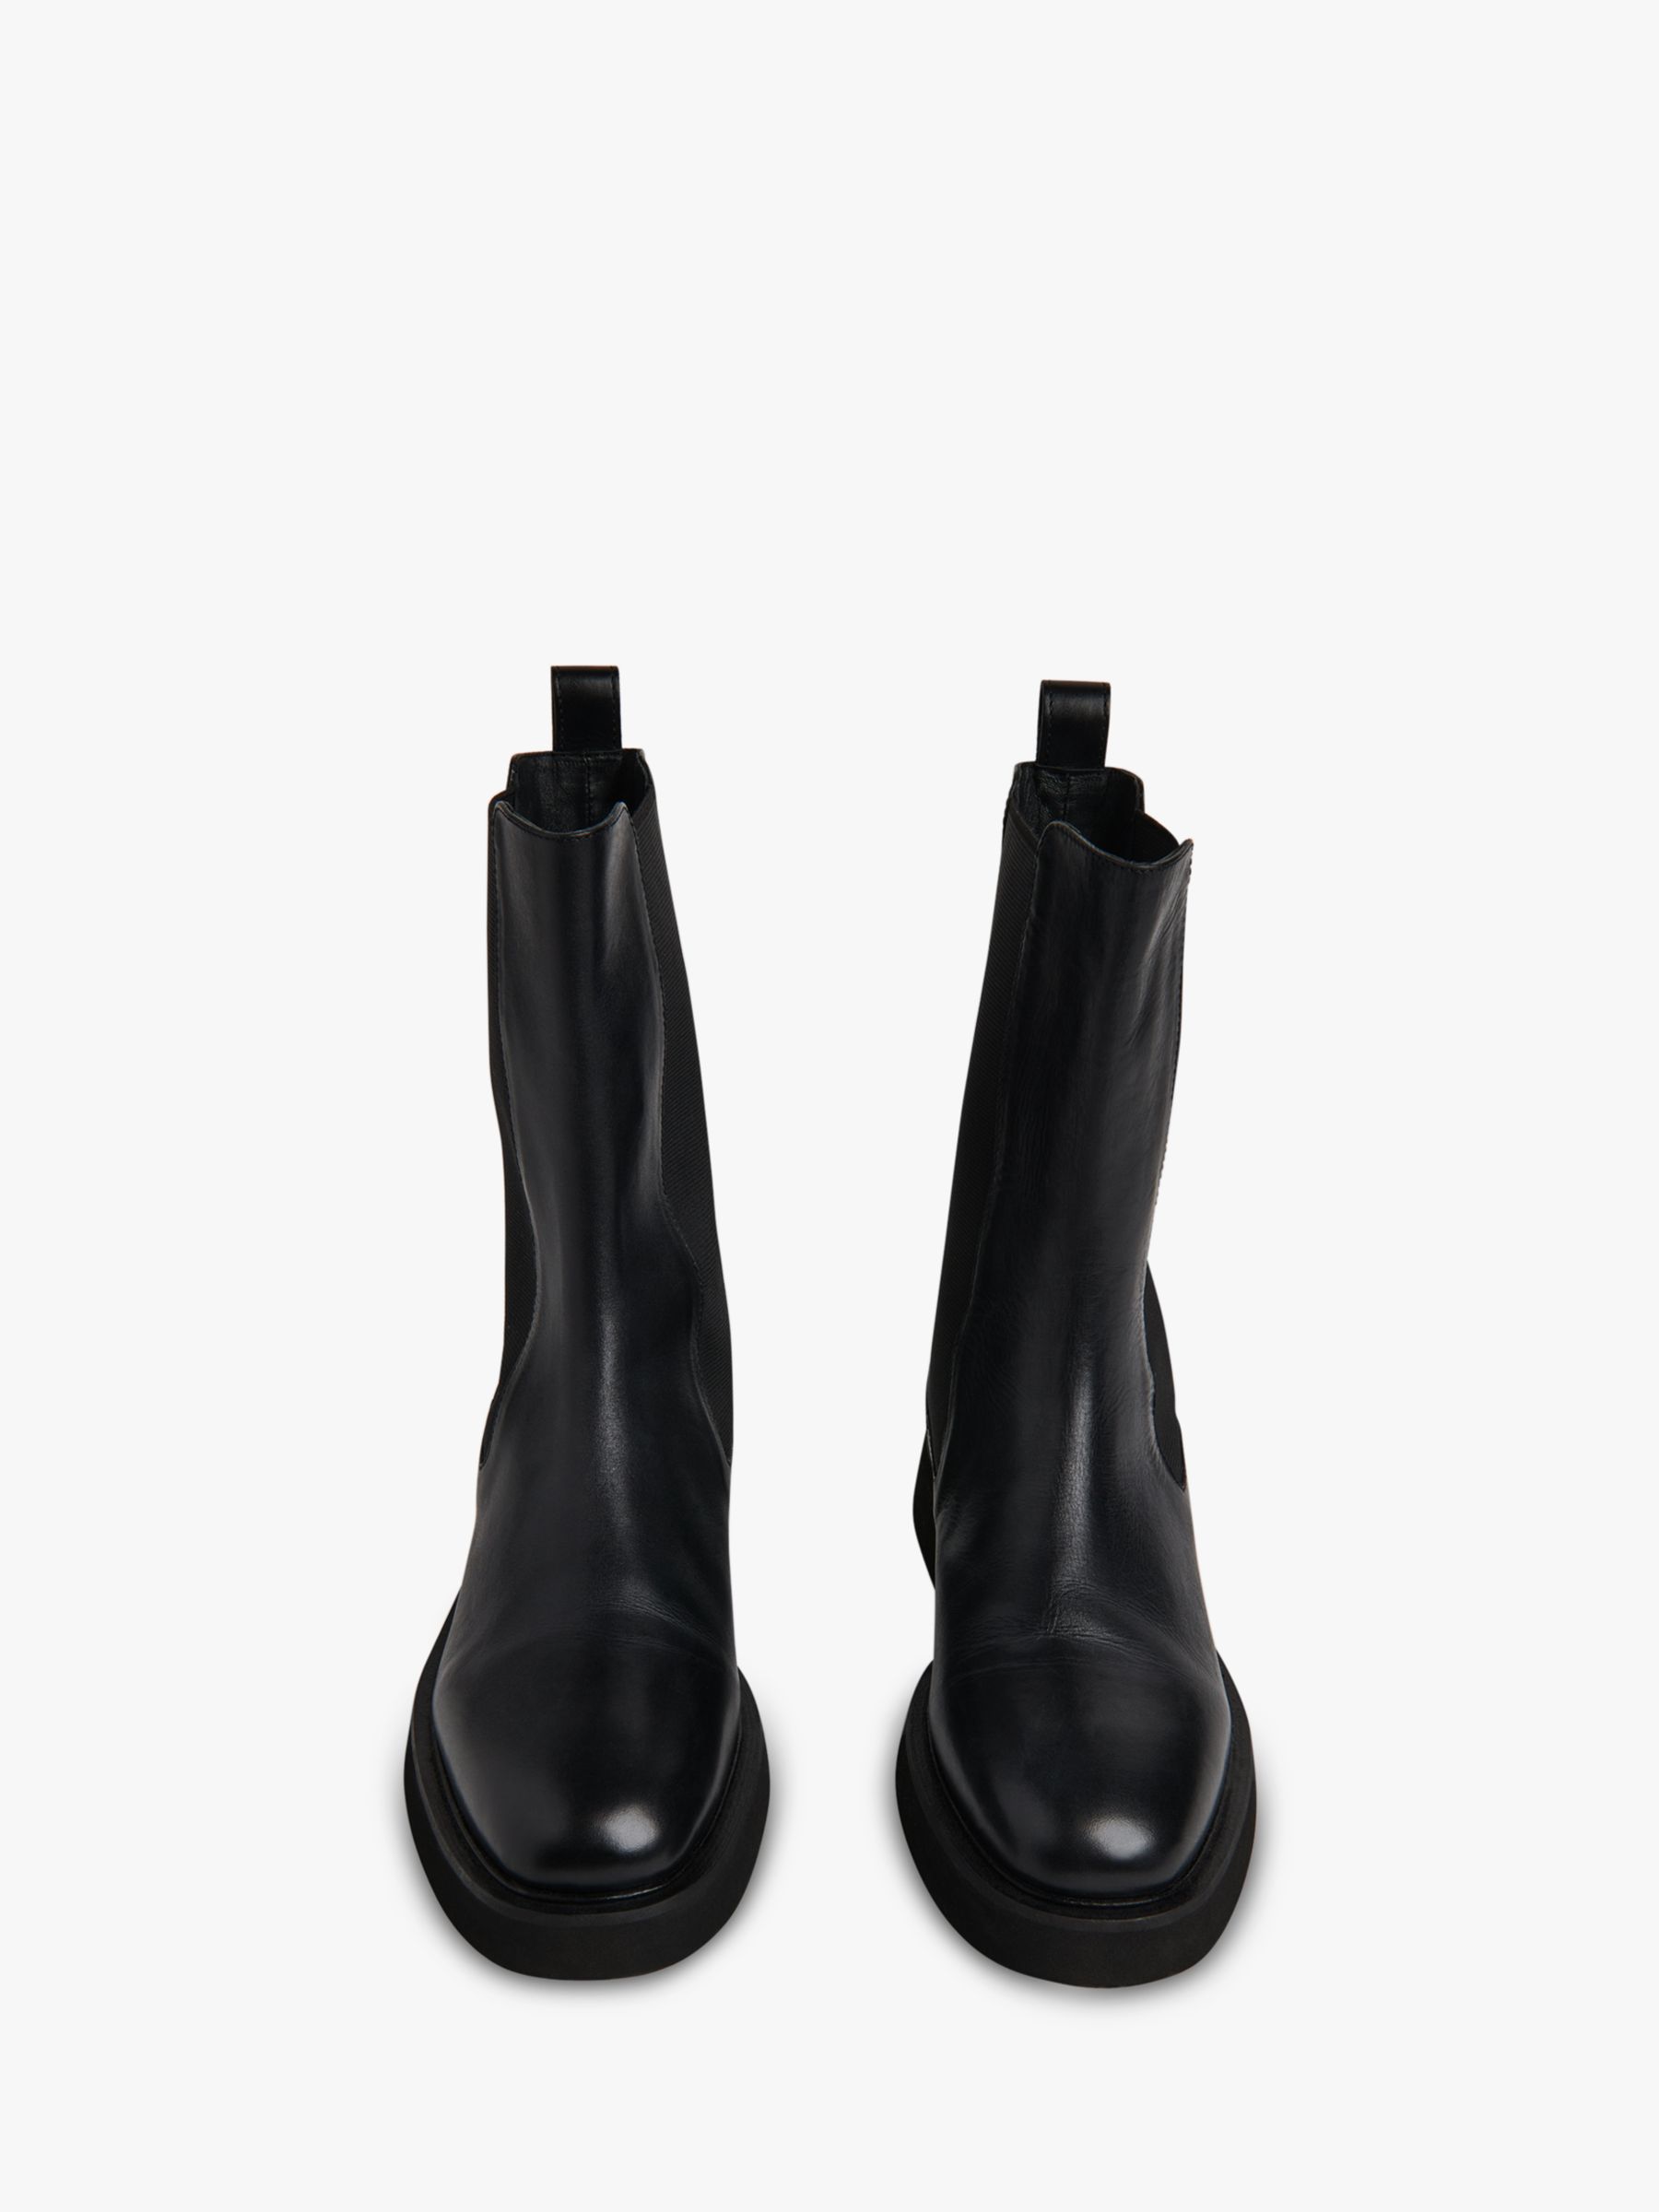 Whistles Newbury Leather Chelsea Boots, Black at John Lewis & Partners